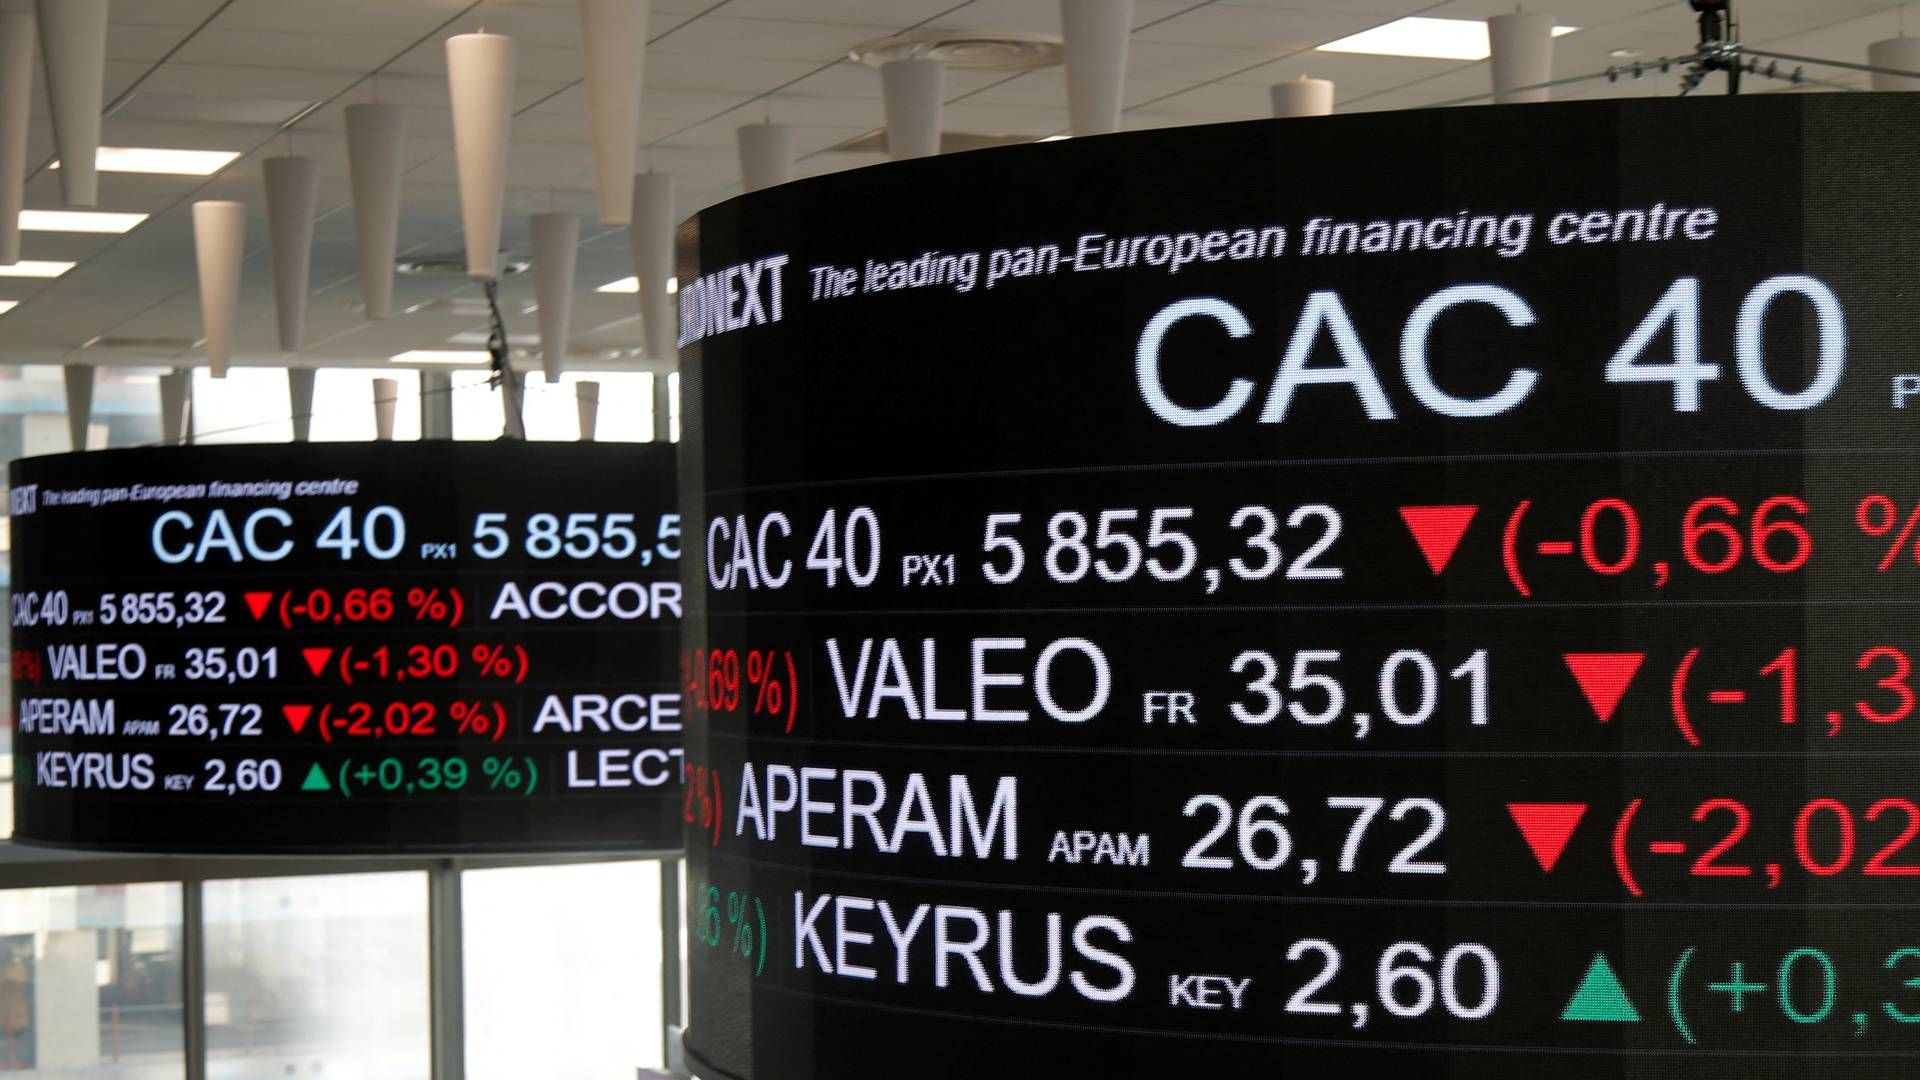 Company stock price information is displayed on screens as they hang above the market services surveillance room center at the Euronext headquarters. | Photo: Charles Platiau/Reuters/Ritzau Scanpix